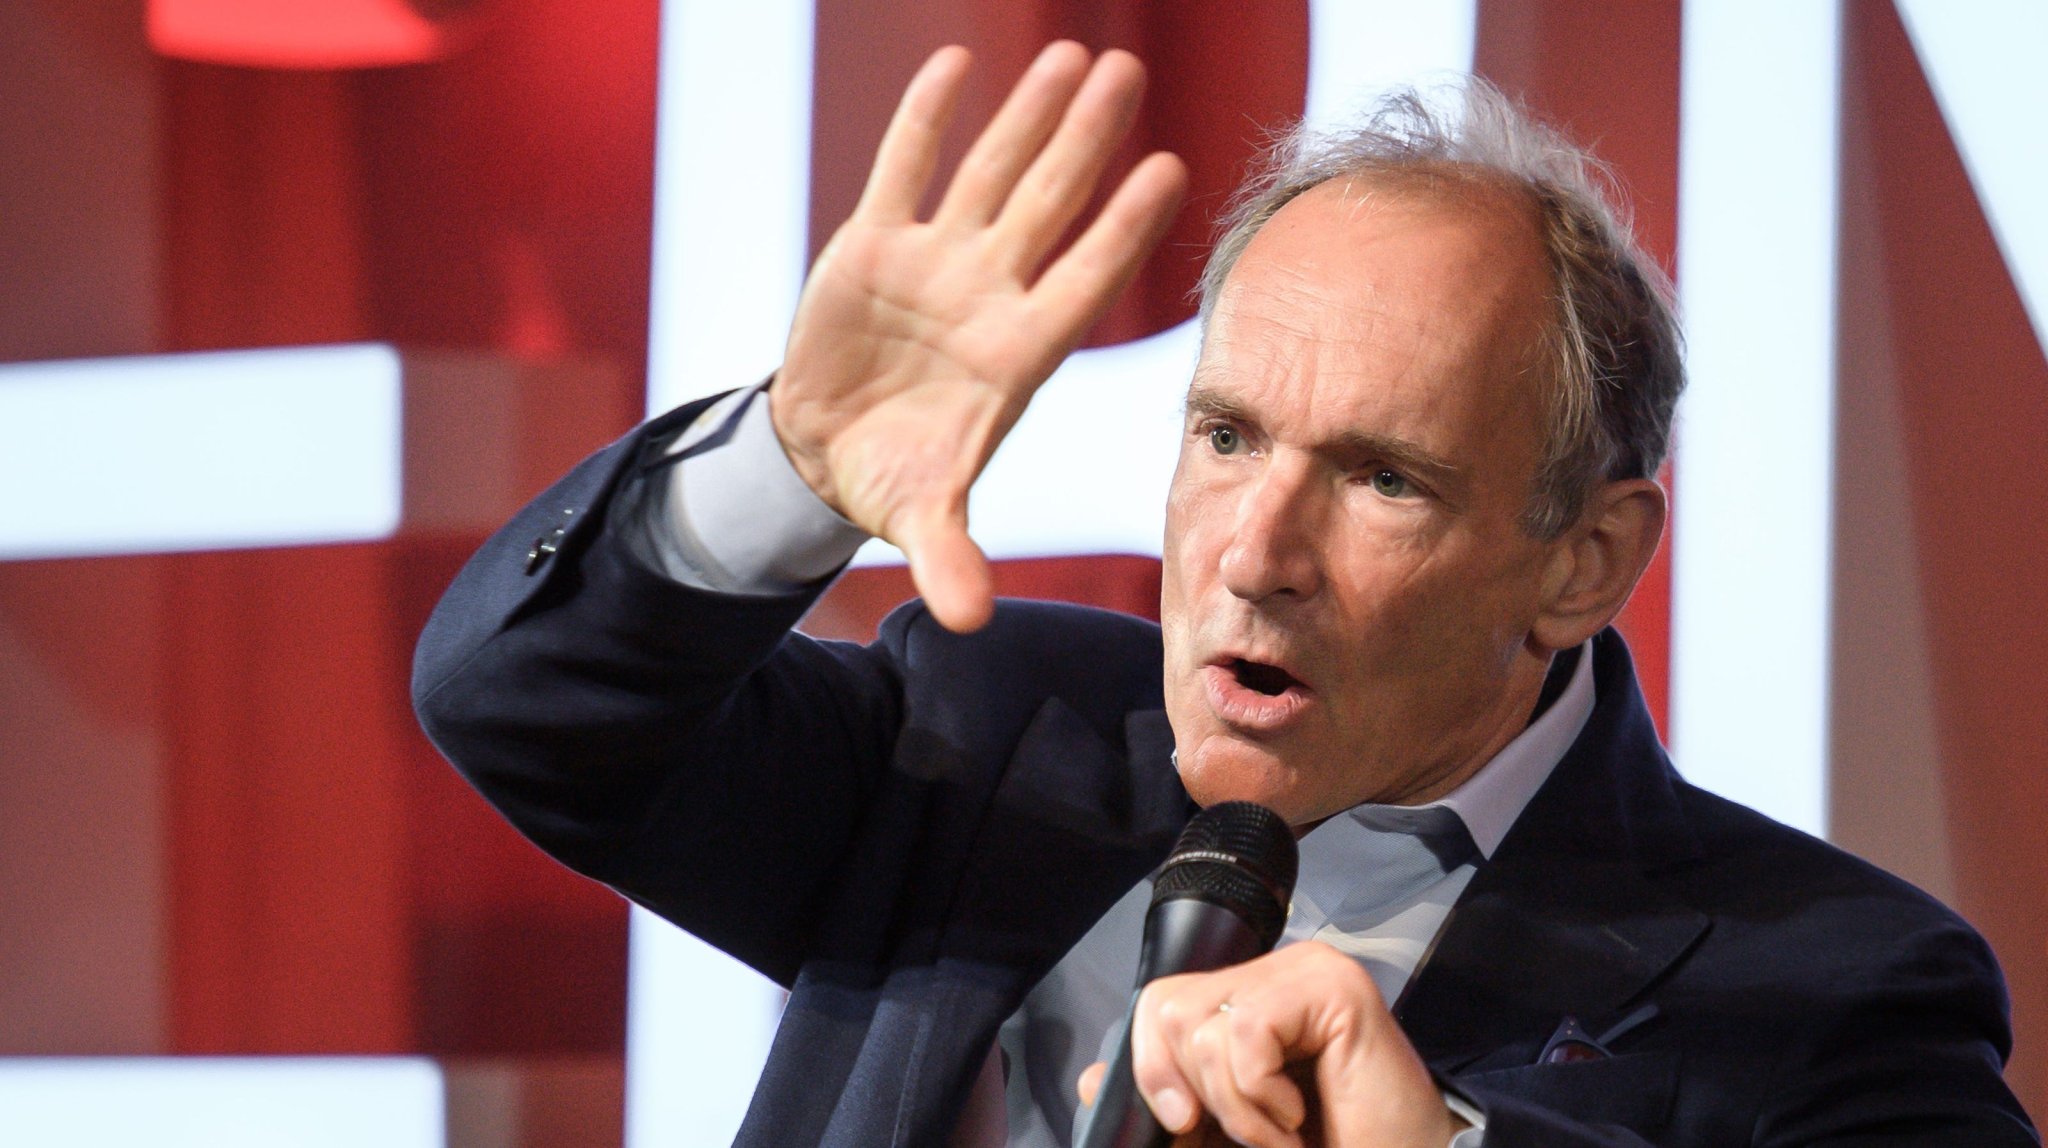 World Wide Web inventor Tim Berners-Lee takes on Google, Facebook, Amazon to fix the internet